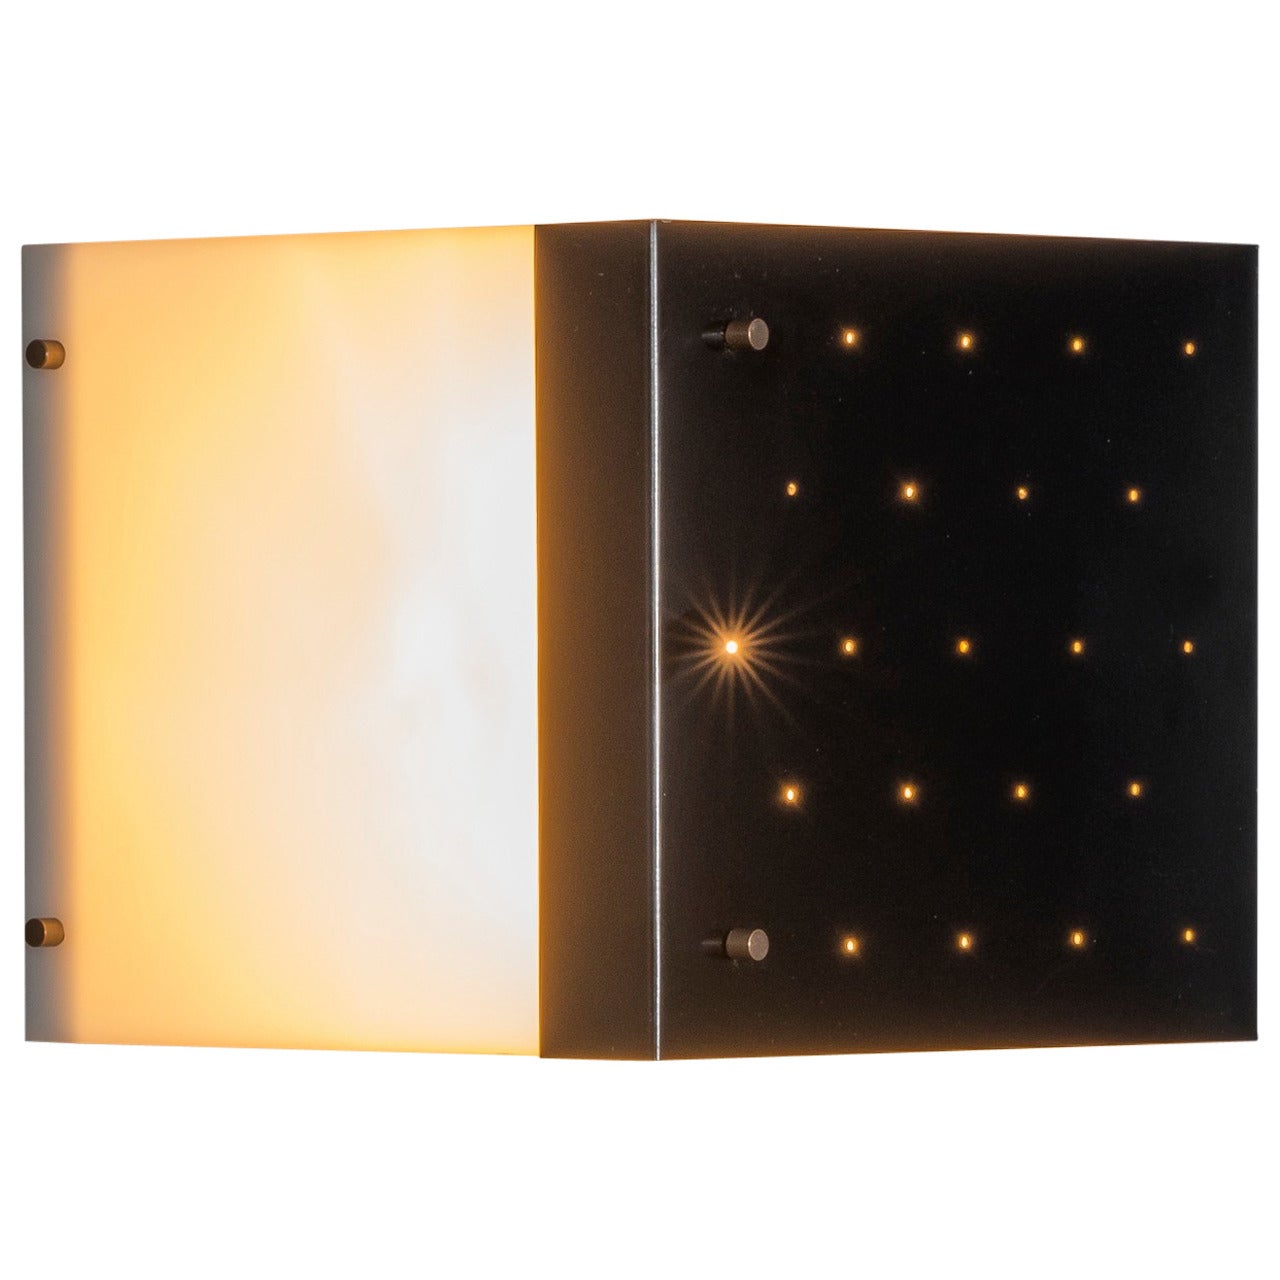 Sconce 299 by Jacques Biny, Jacques Biny for Luminalite Edition, circa 1955 For Sale